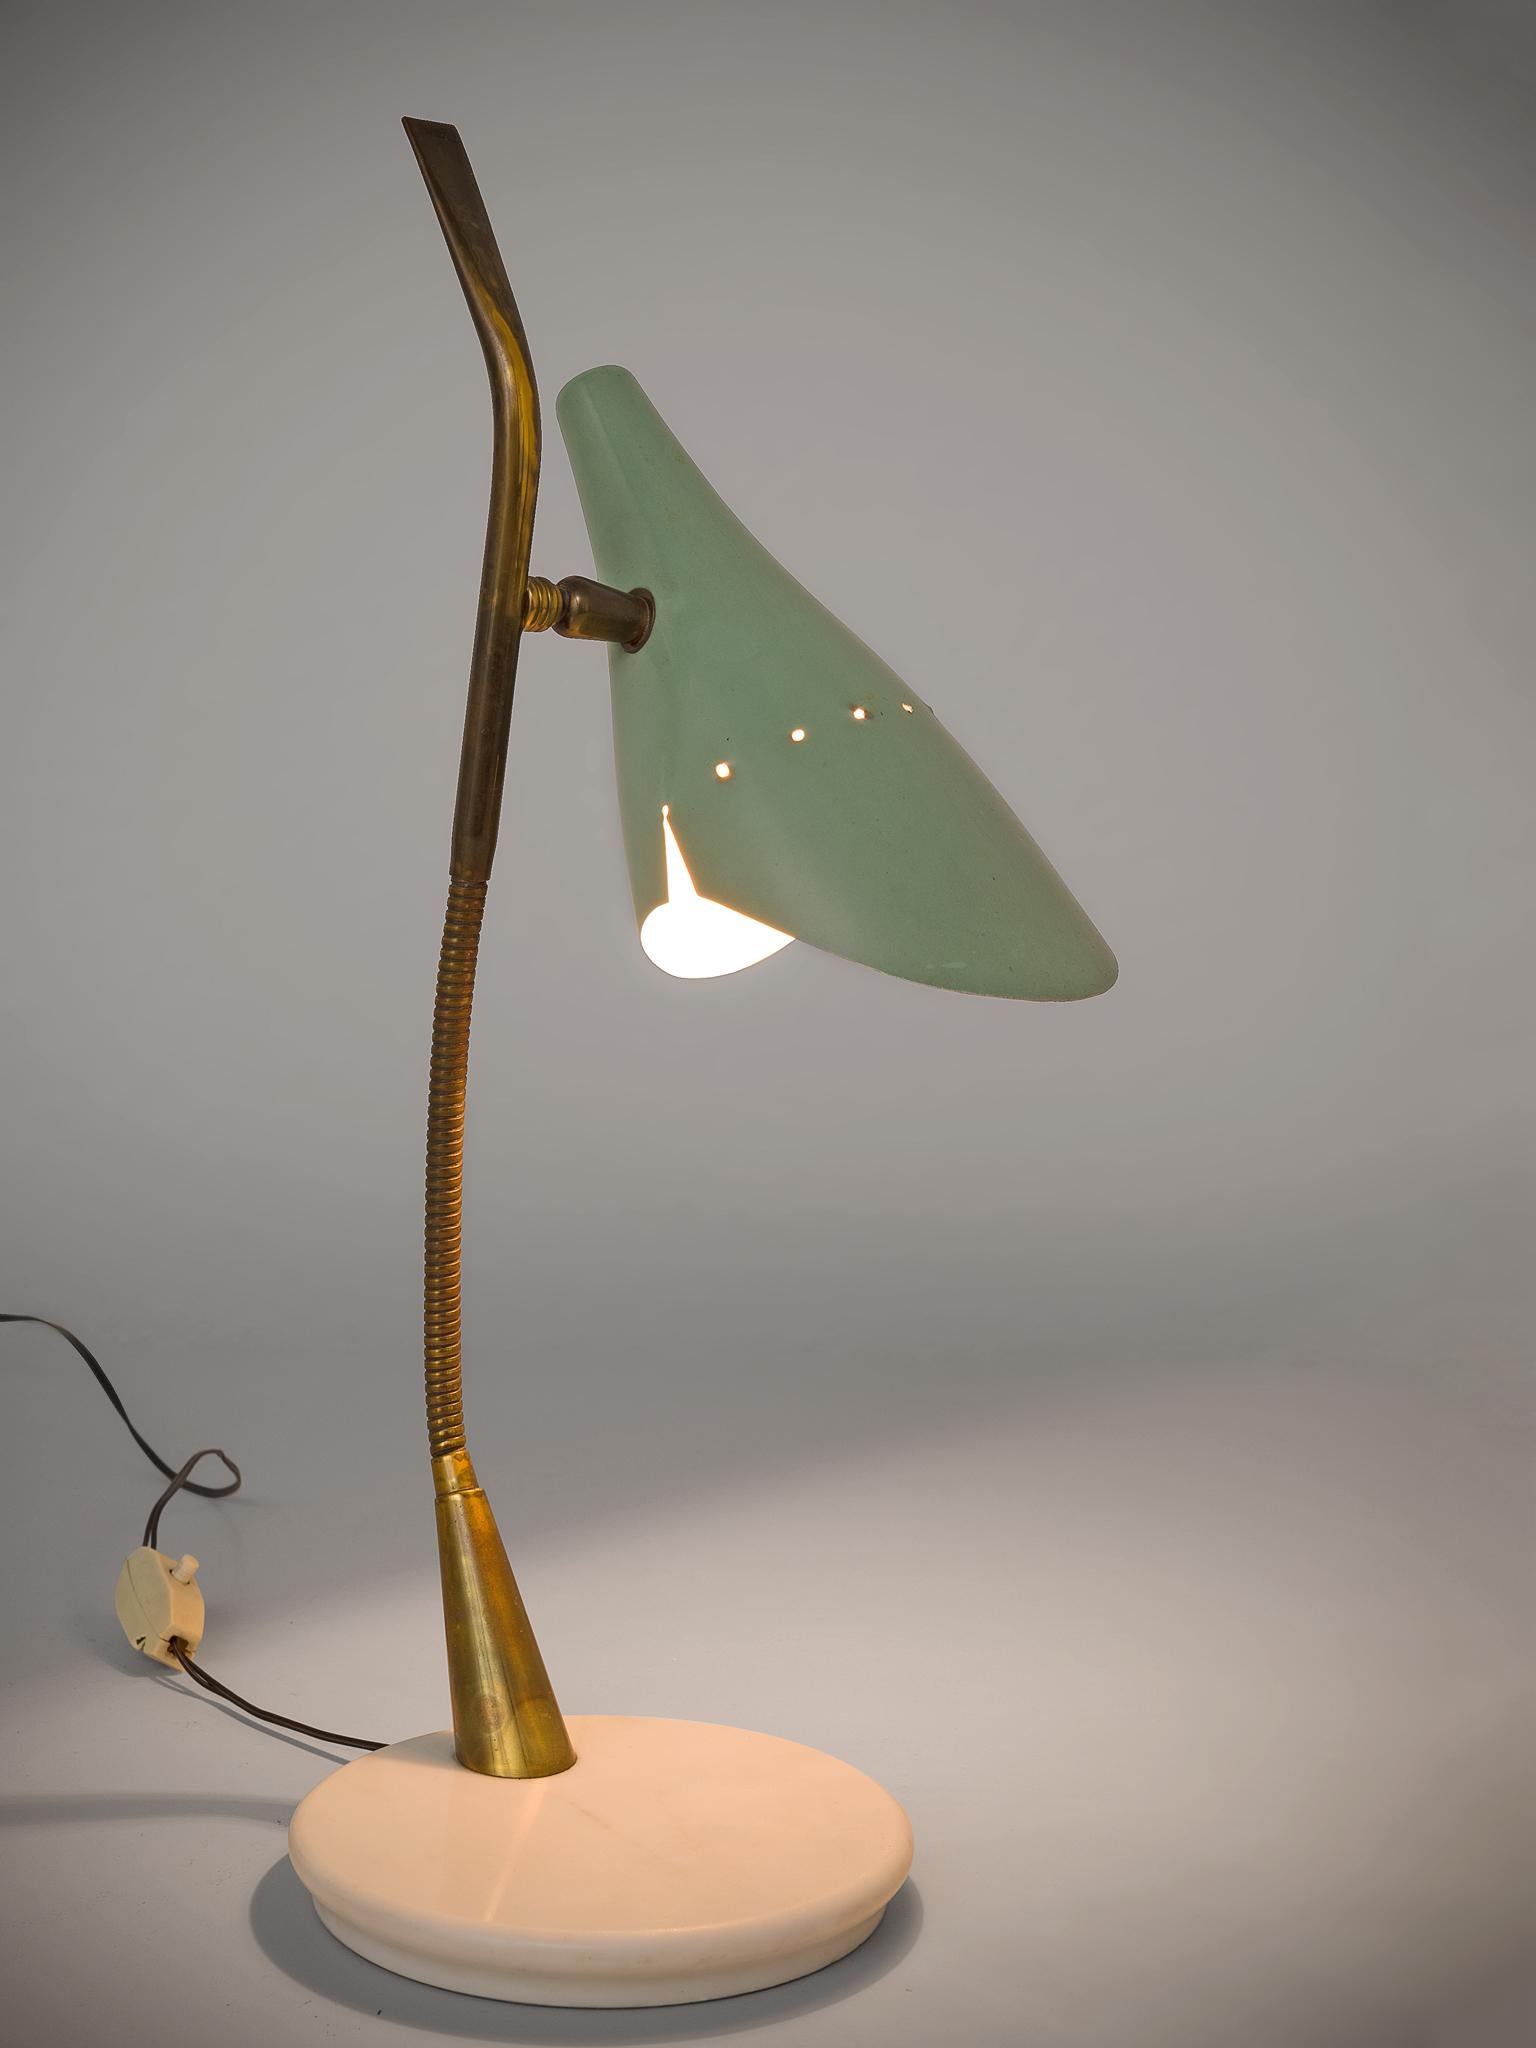 Oscar Torlasco, table lamp, green-blue metal, bras and marble, Italy, 1950s.

This 1950s adjustable sea green light is manufactured by Lumen. The metal shade is connected to a flexible brass colored brass arm resting on a round marble base. Very